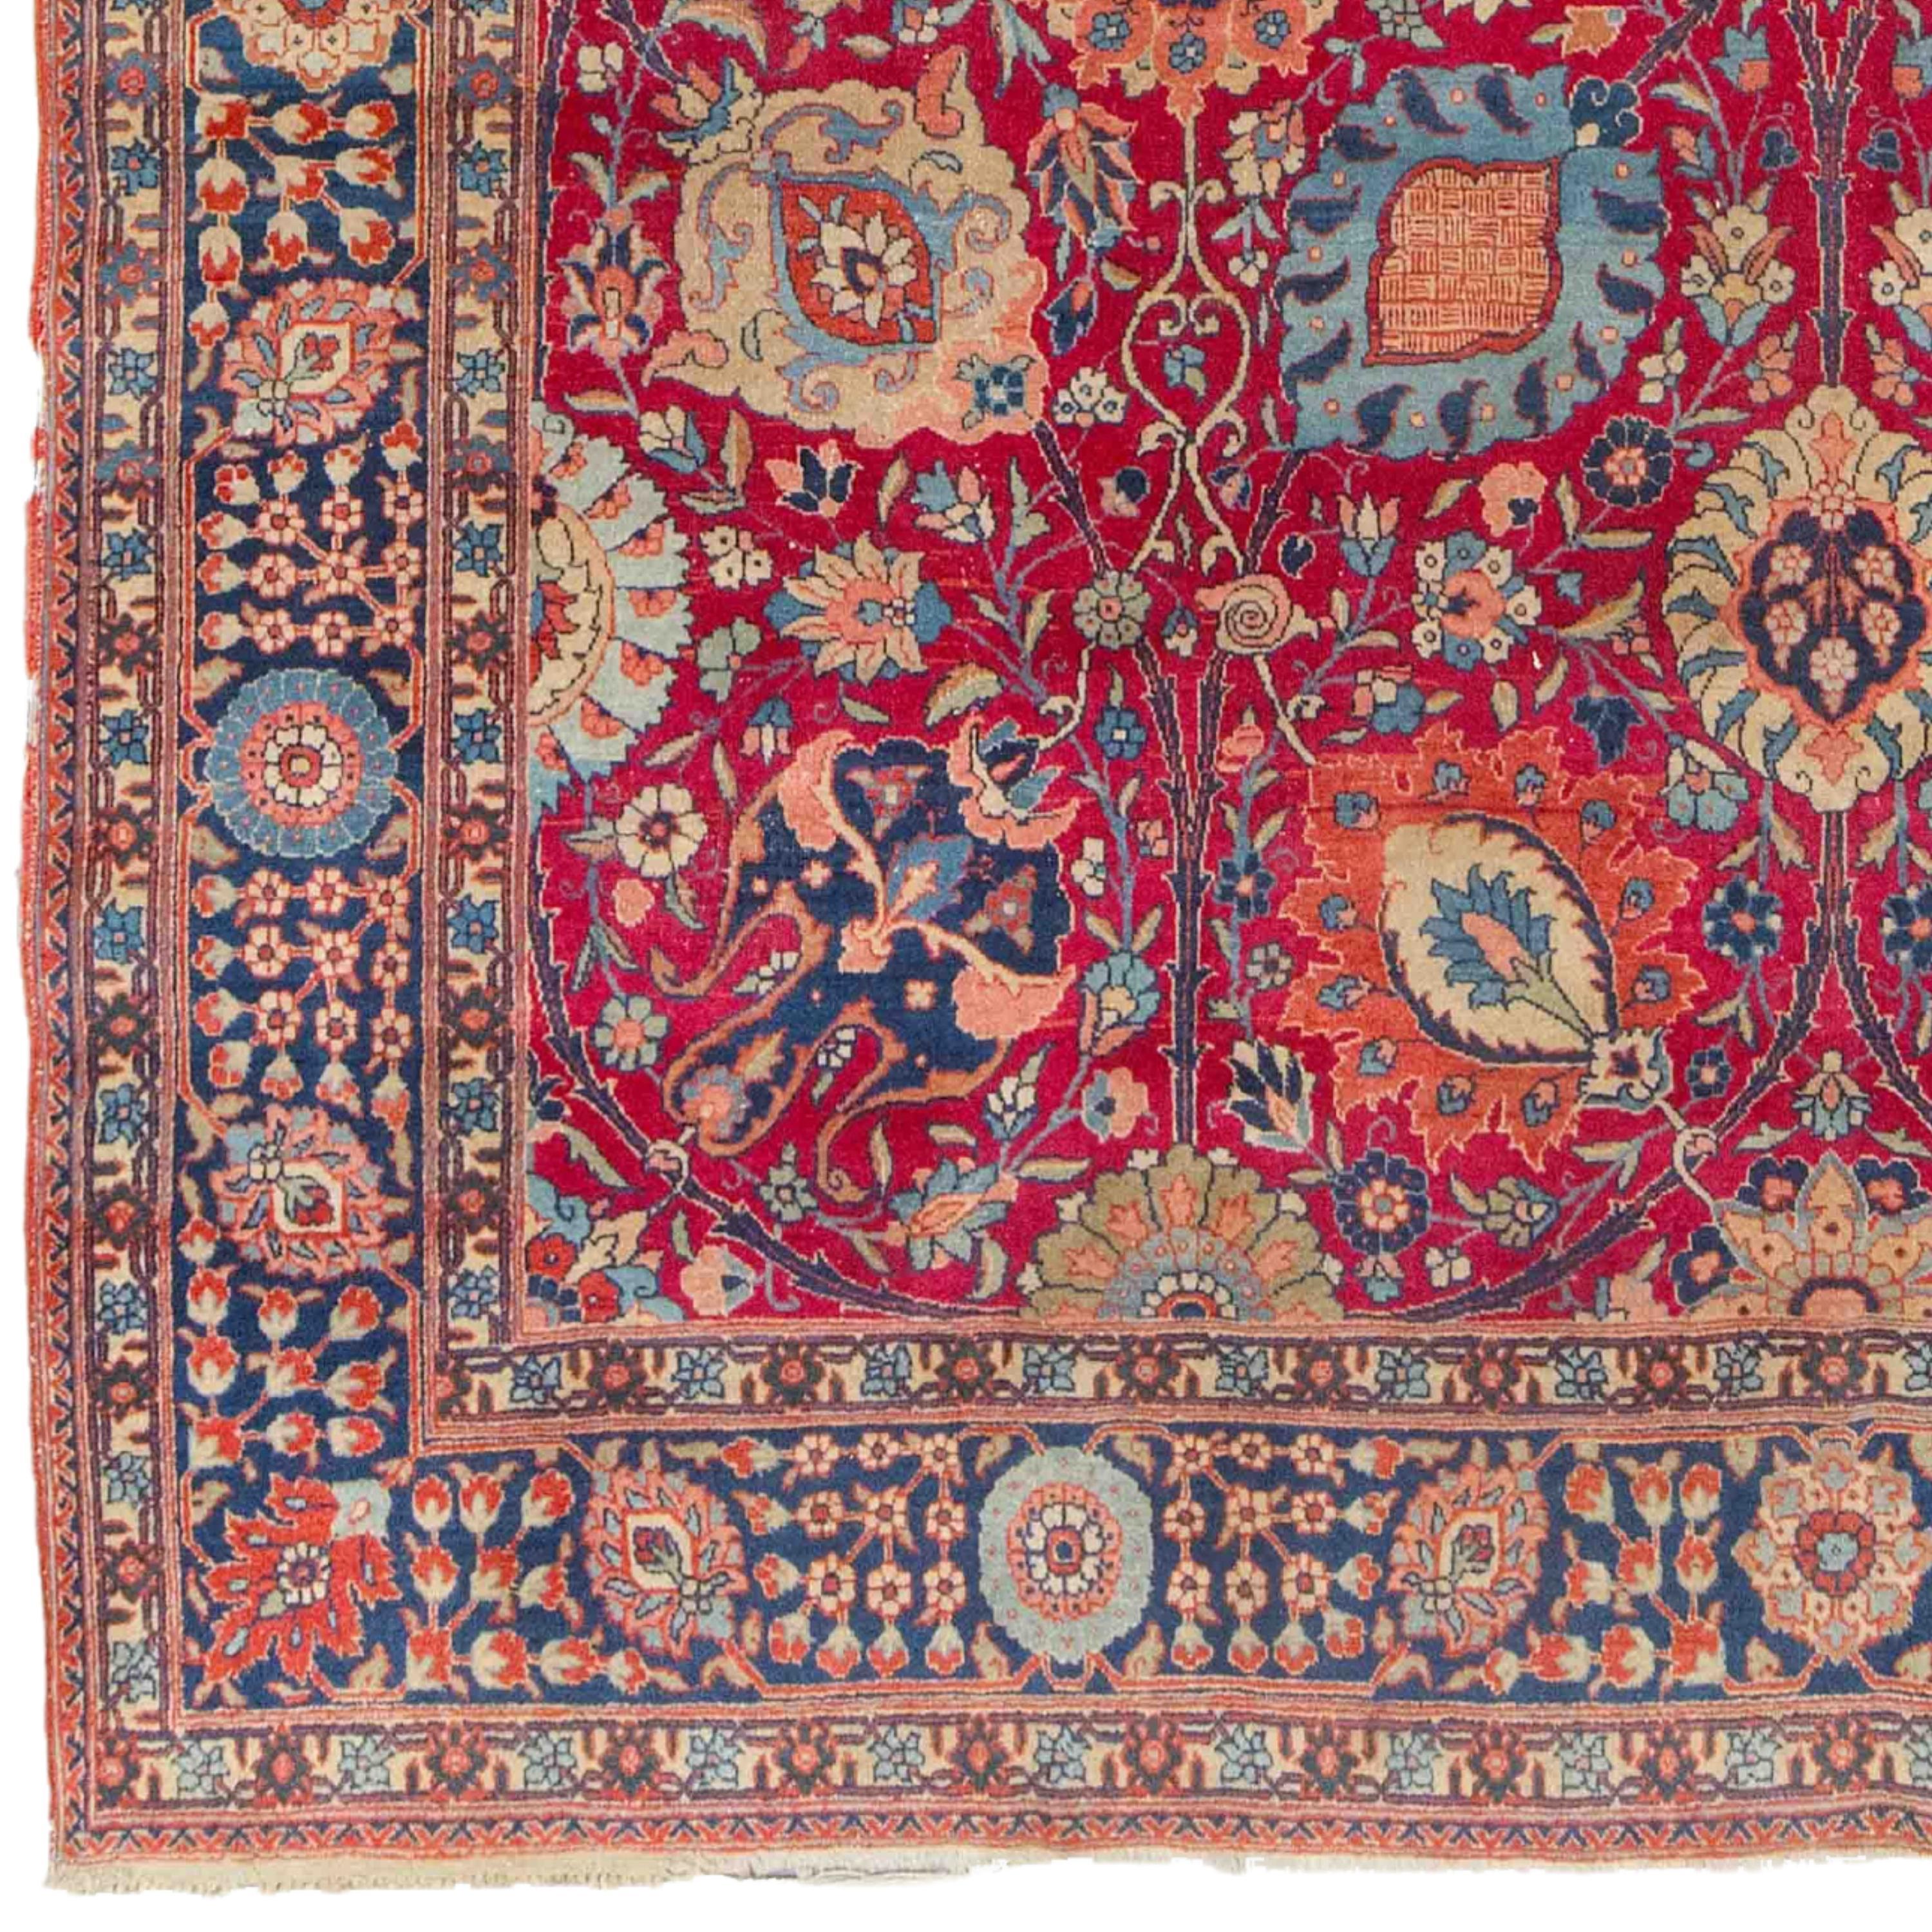 Antique Tabriz Rug 260 x 360cm (8,53 - 11,81 ft) Late of 19th Century Tebriz Rug

From the mid-19th century, there was a revival in commercial carpet production in Azerbaijan, and Tabriz became one of the country's most important centers producing